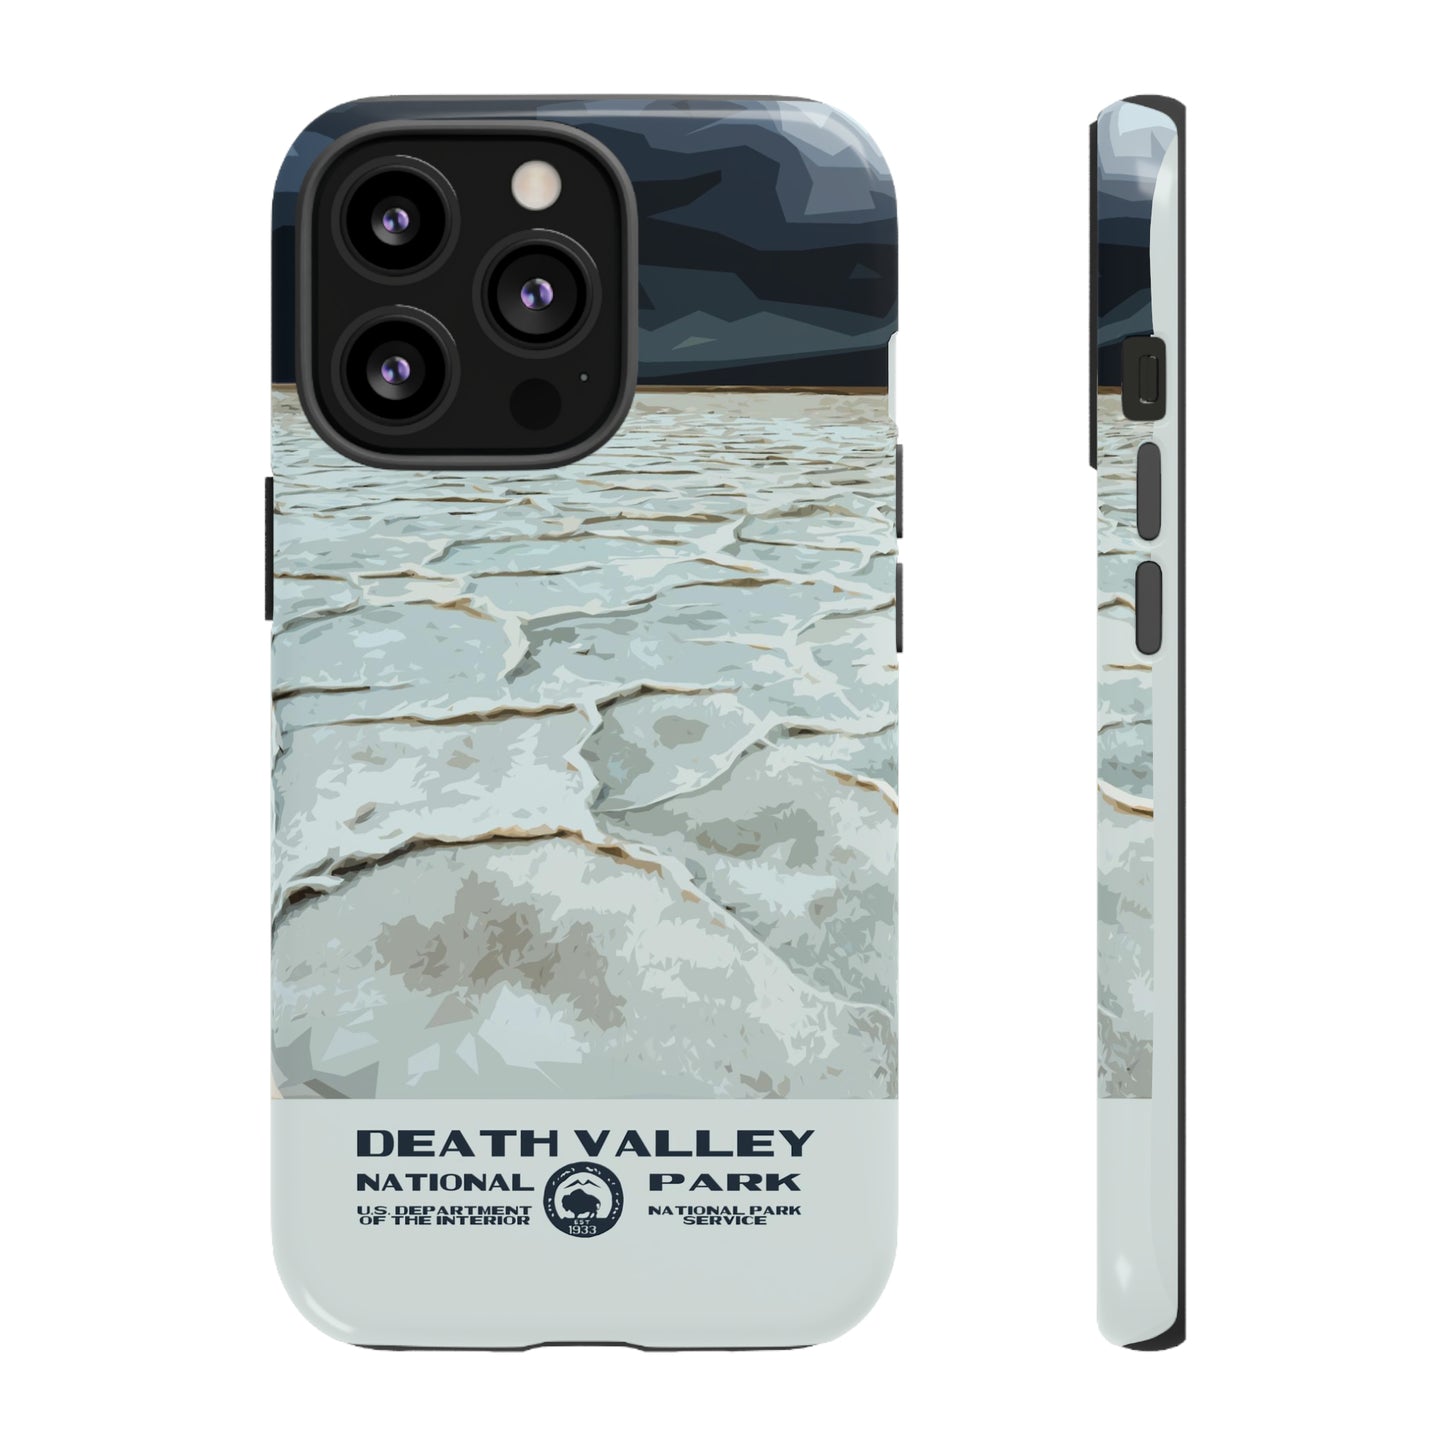 Death Valley National Park Phone Case - Badwater Basin